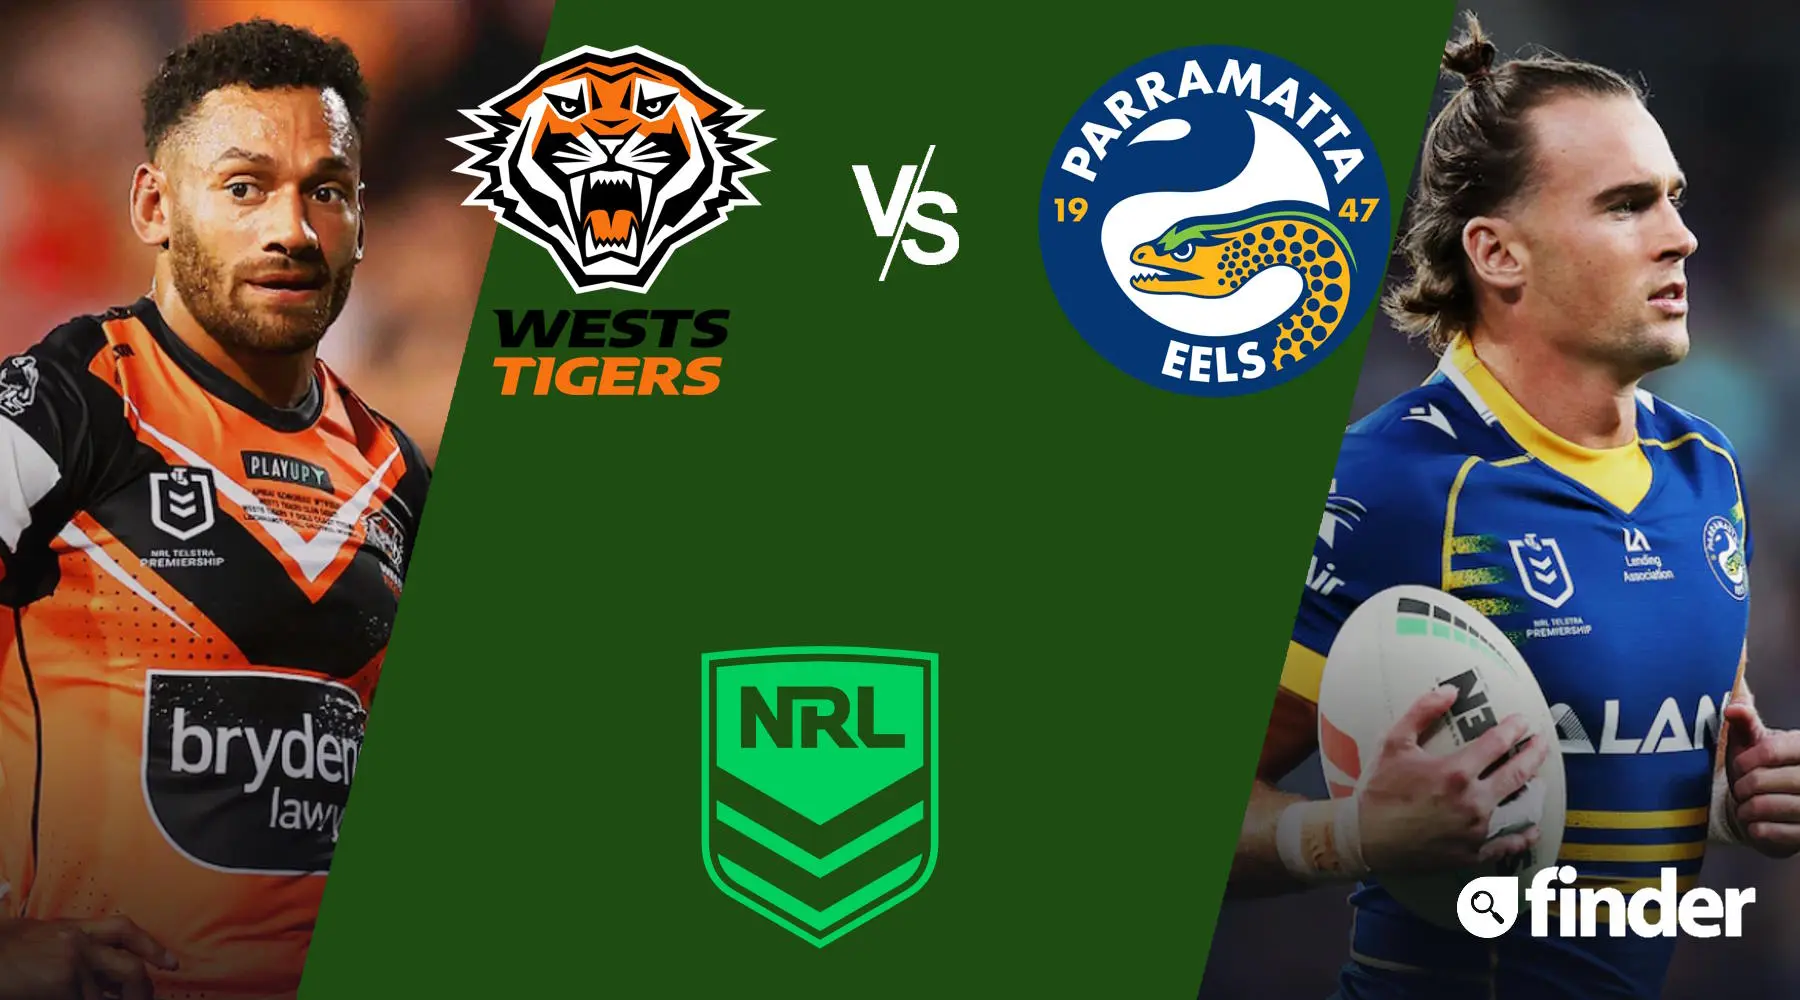 How to watch Tigers vs Eels NRL live, match preview, kick-off time